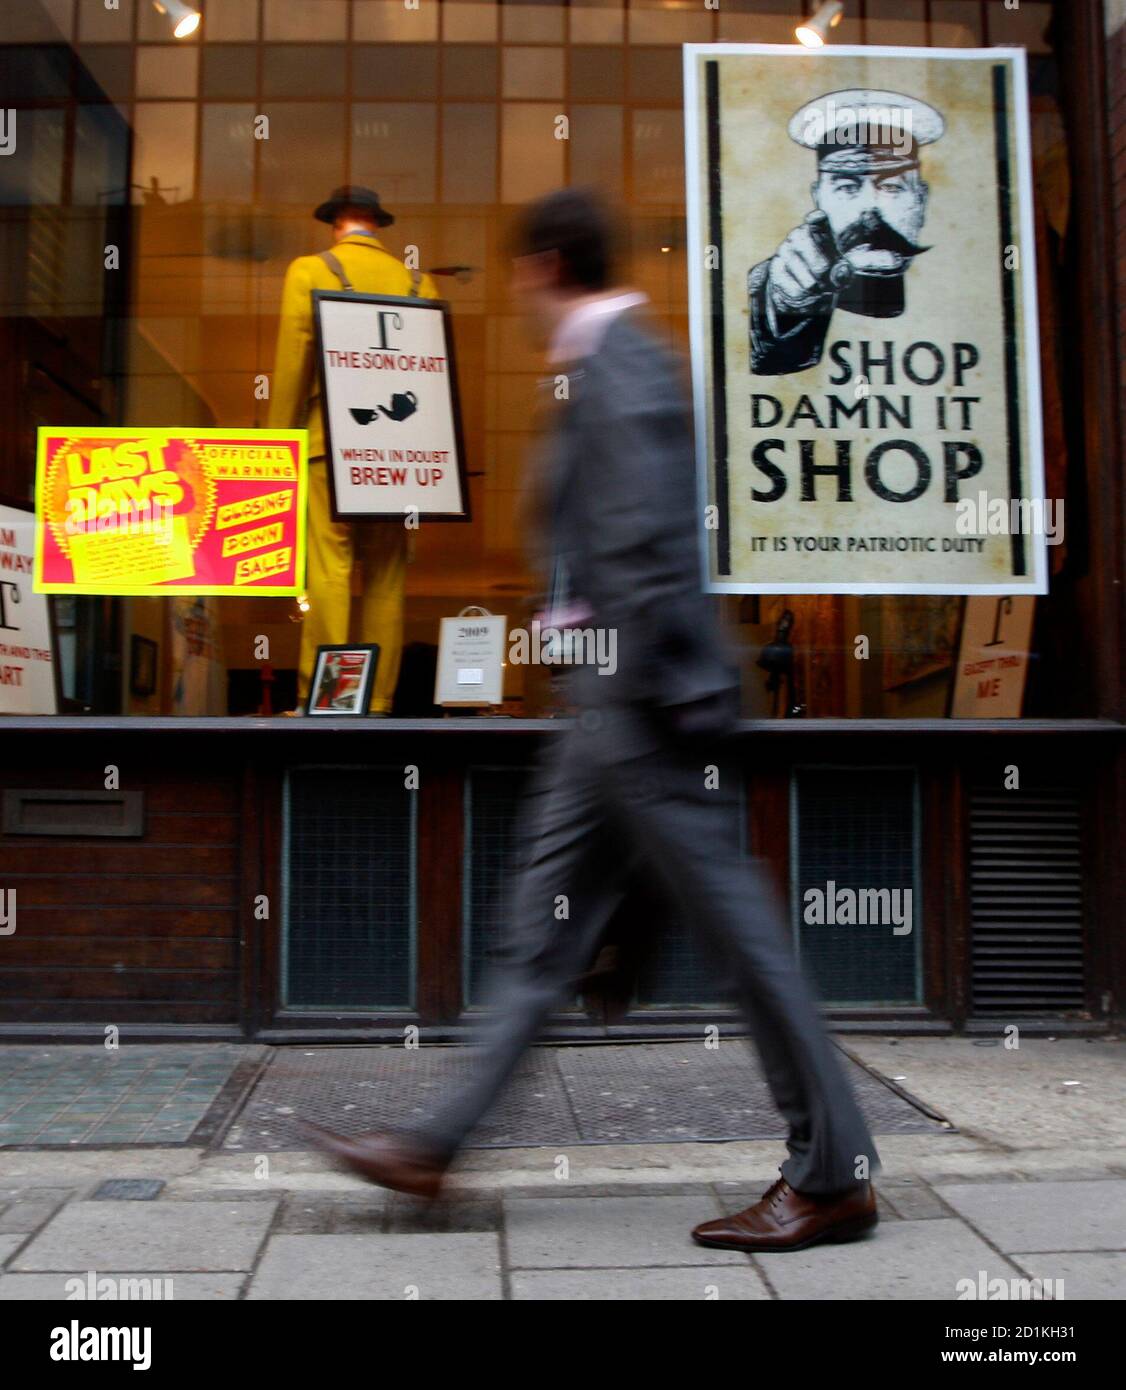 A man walks past a shop in central London December 18, 2008. Retail sales rose unexpectedly in November, helped by online shoppers, official data showed on Thursday, but record high government borrowing and shrinking mortgage lending underlined the scale of the country's economic downturn.  REUTERS/Eddie Keogh (BRITAIN) Stock Photo